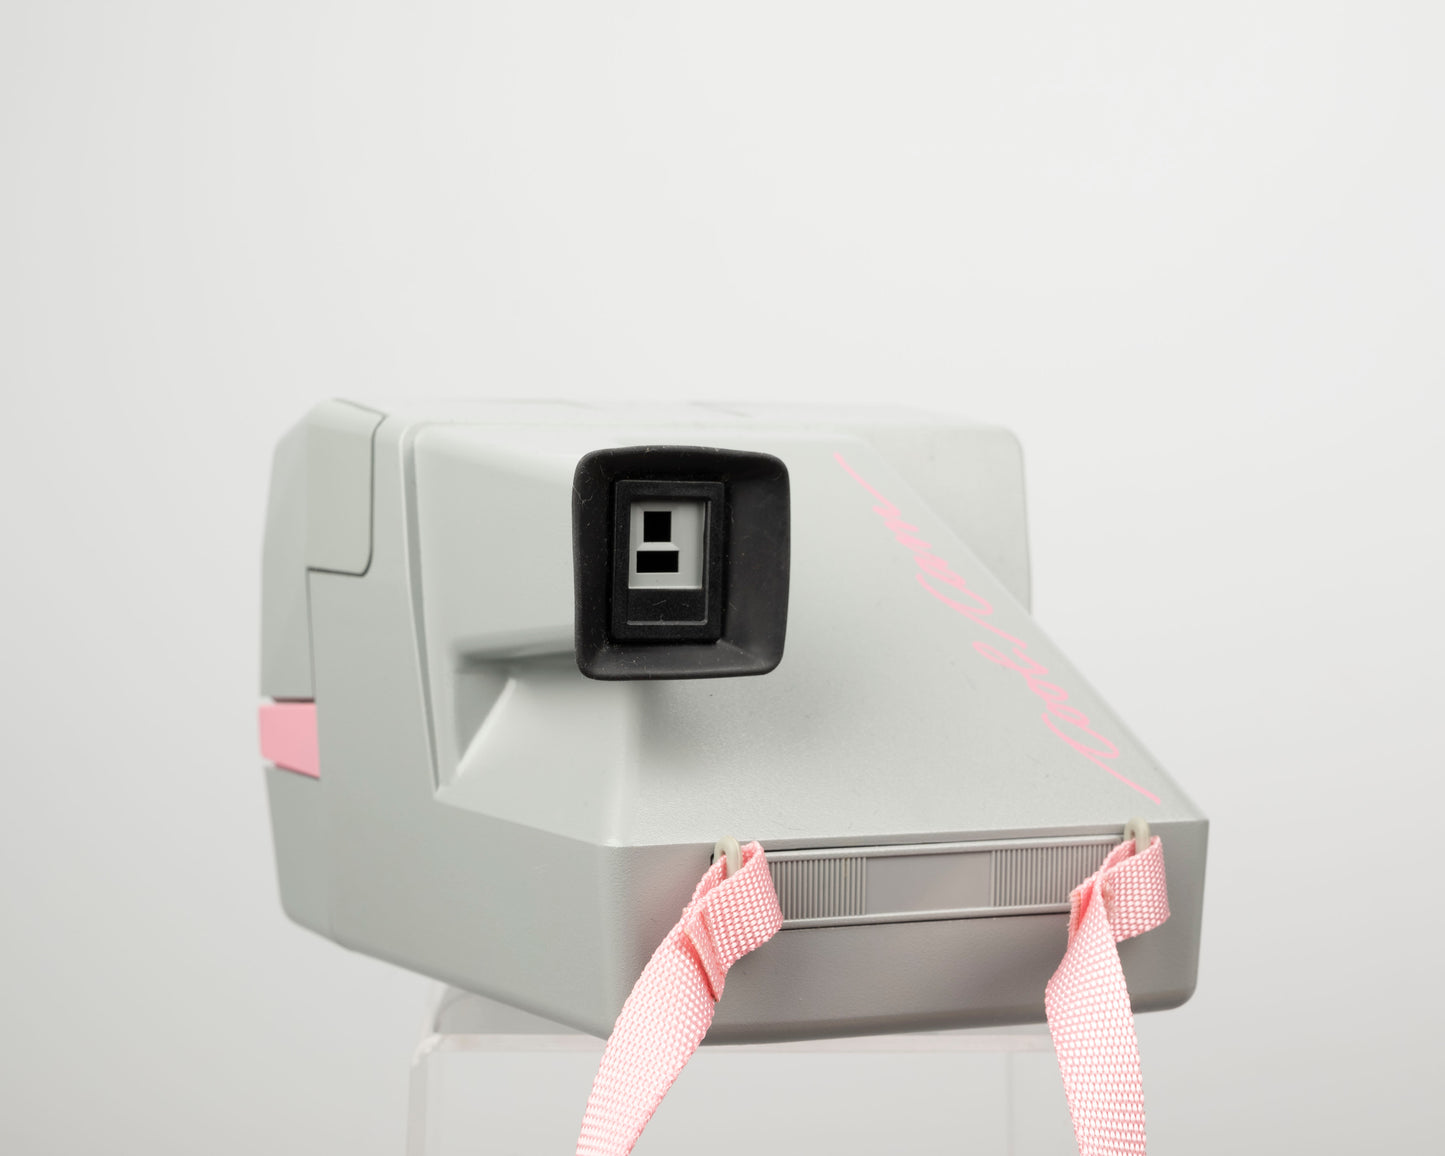 Grey and Pink Polaroid 600 Cool Cam instant camera (serial C8W38593)